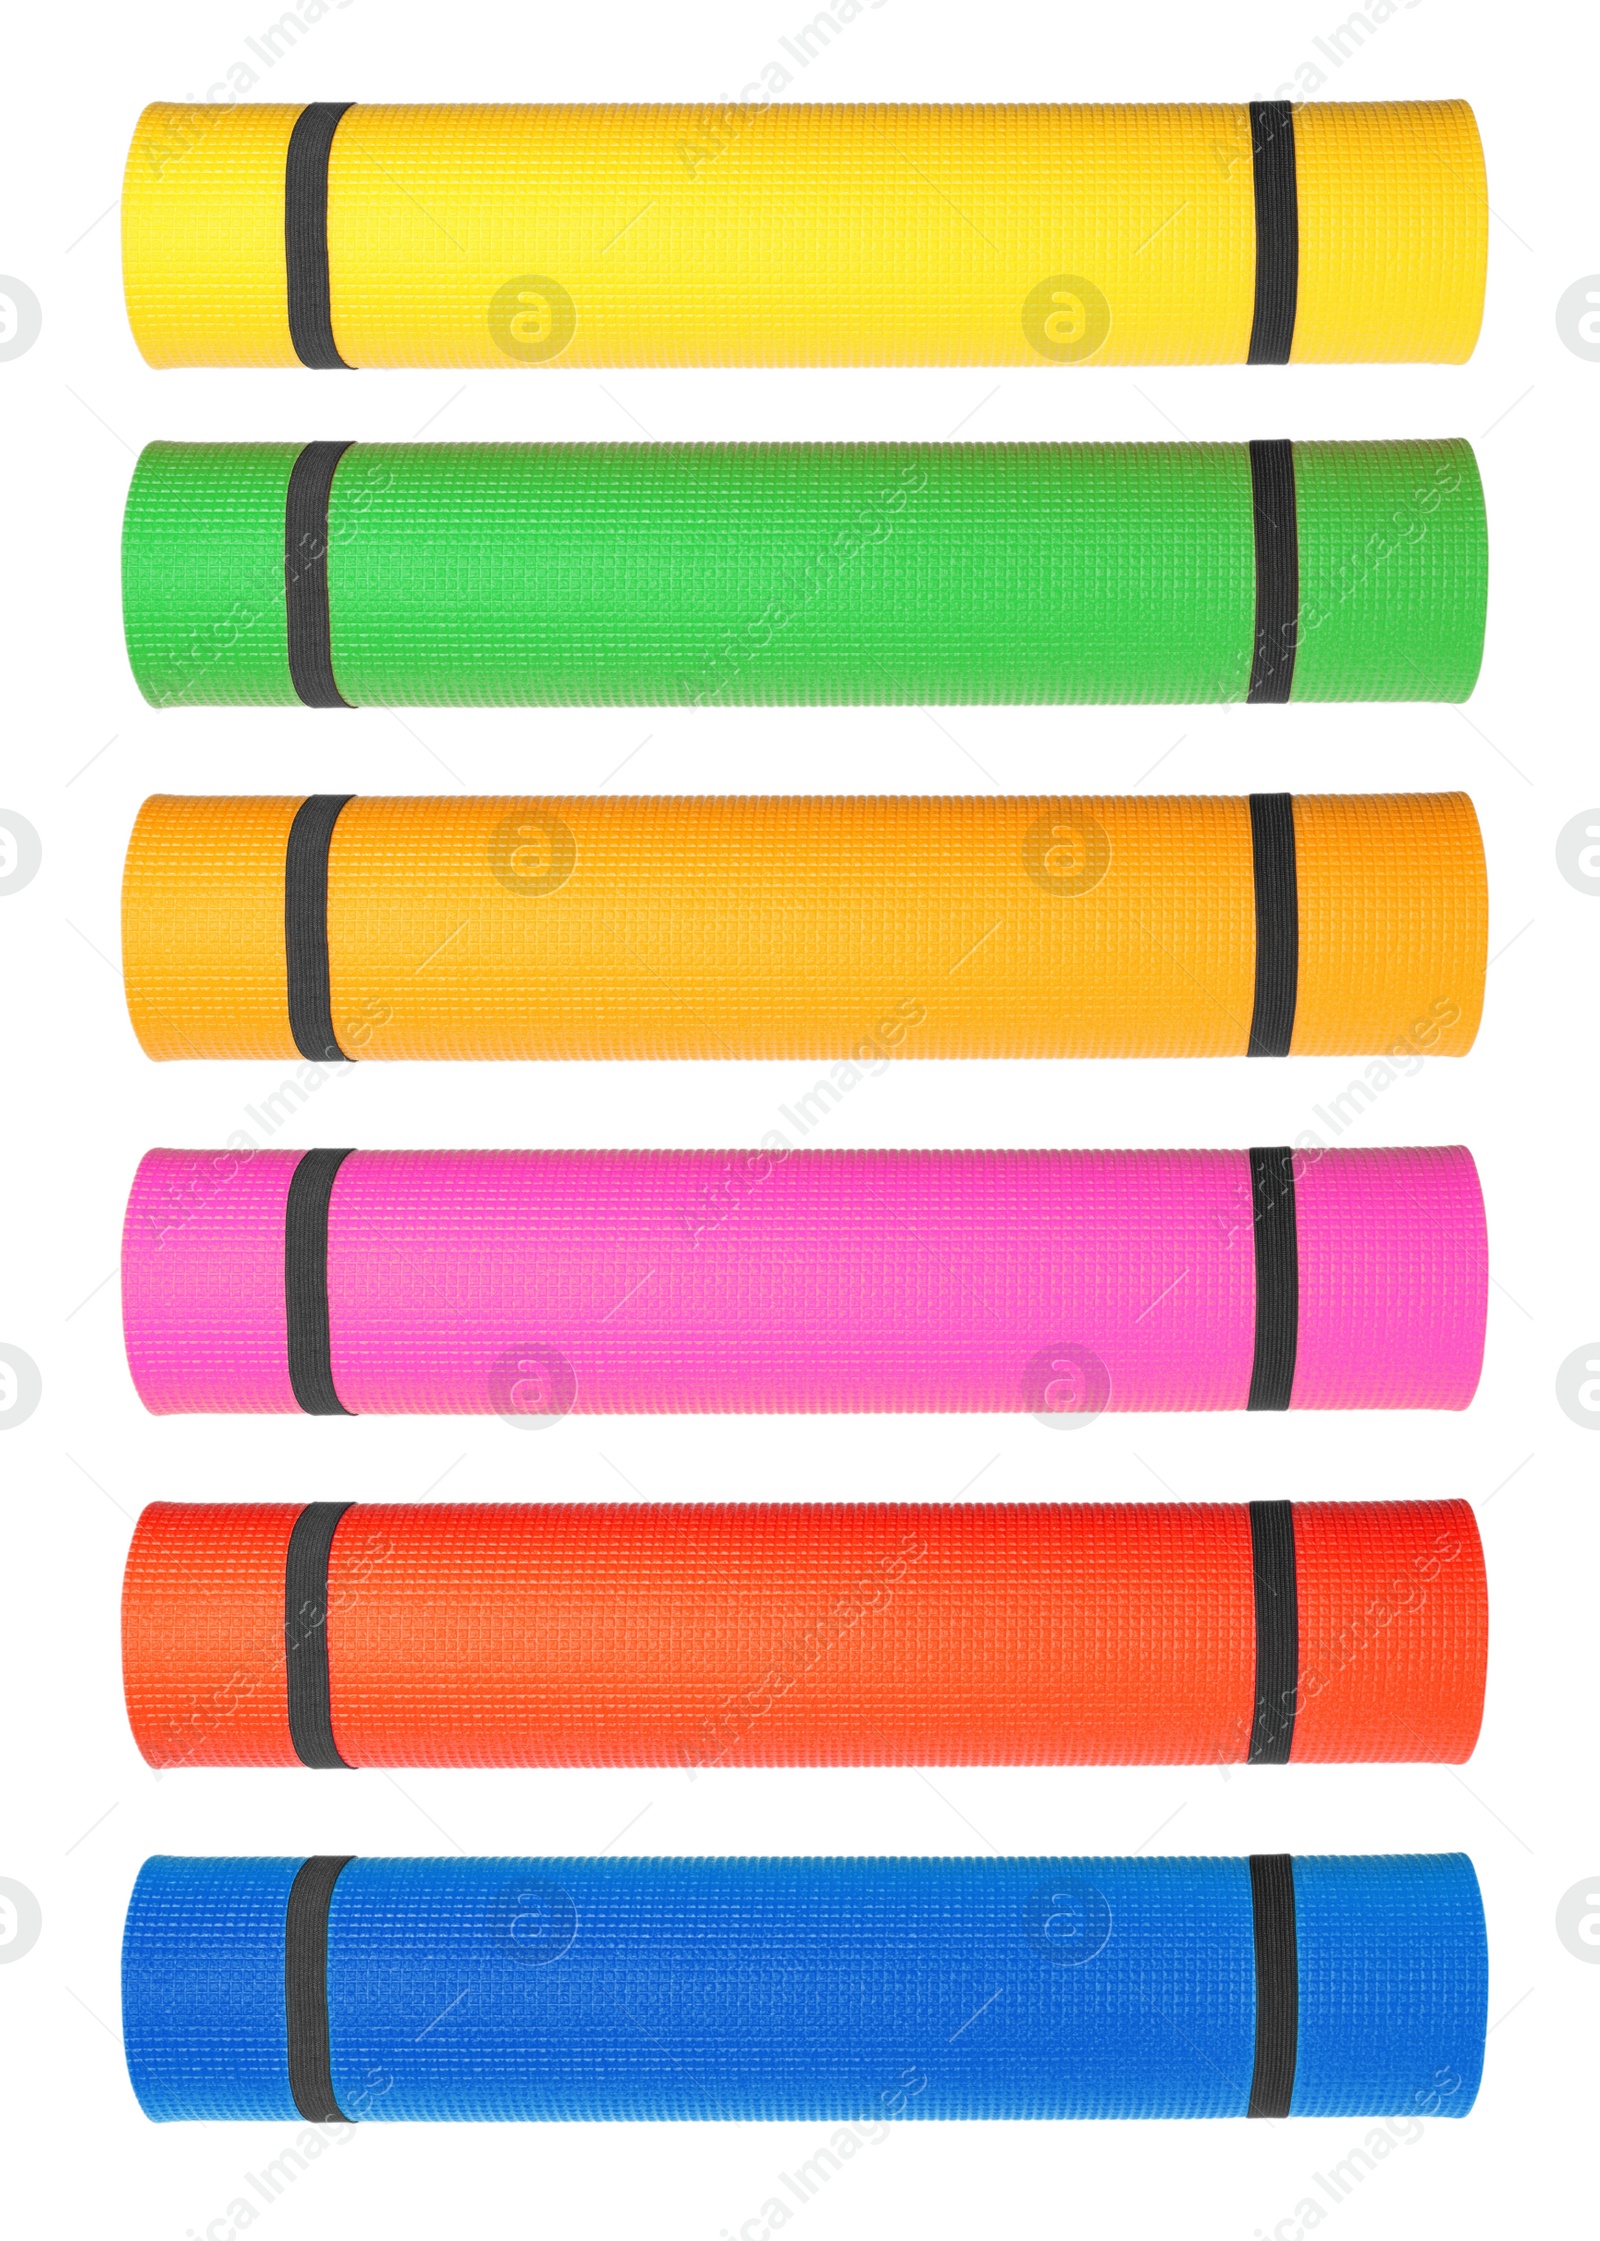 Image of Set with different bright rolled camping mats on white background. Vertical banner design  